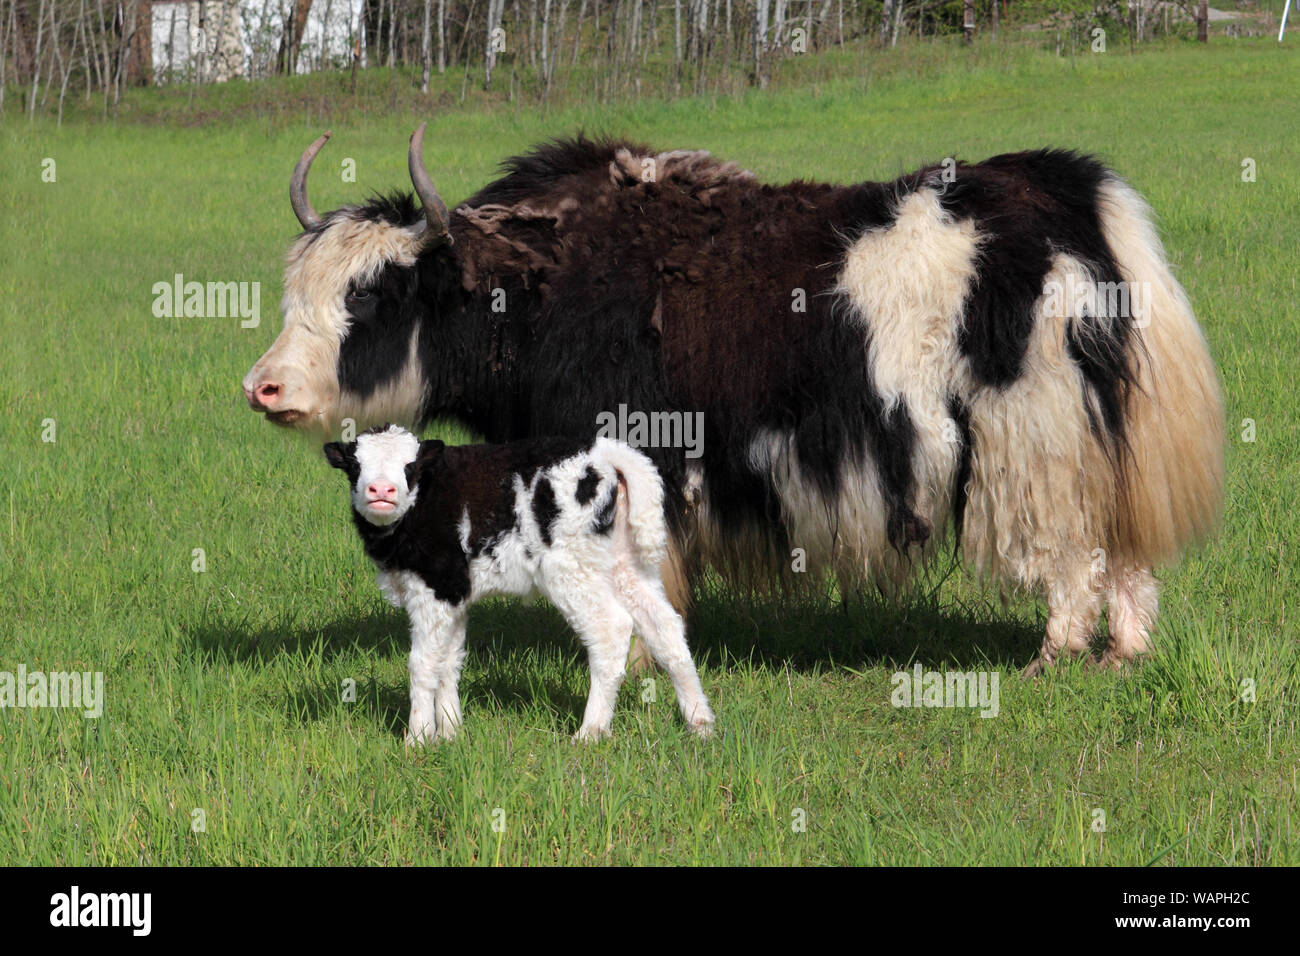 A black and white Yak cow stands with her calf in a luscious green pasture Stock Photo